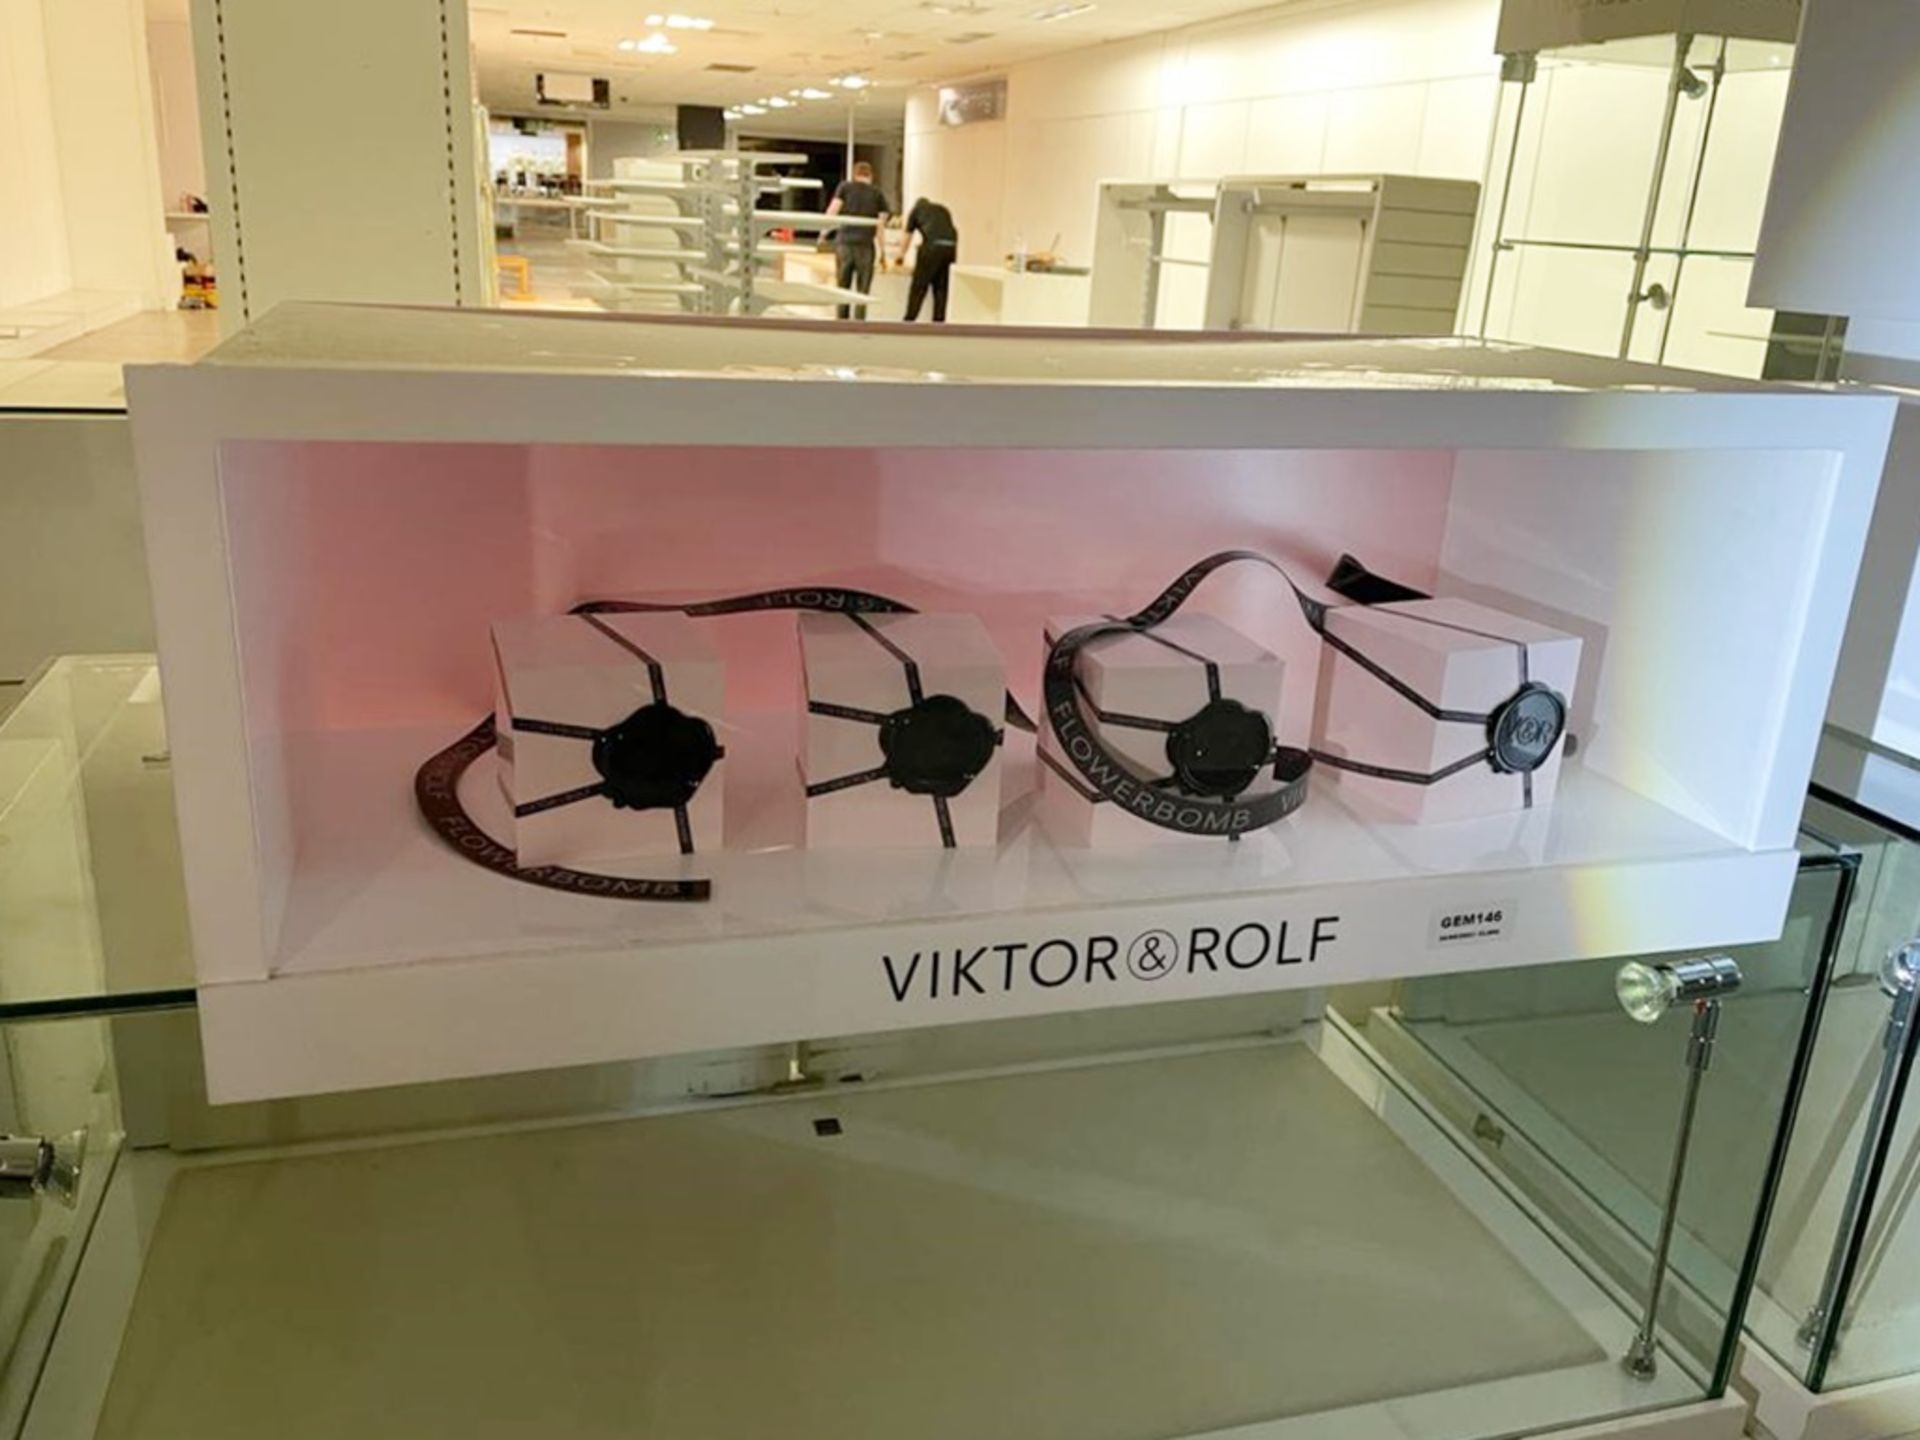 1 x Viktor & Rolf Promotional Flower Bomb Perfume Display in White Perspex - Size H24 x W77 x D30 - Image 5 of 6